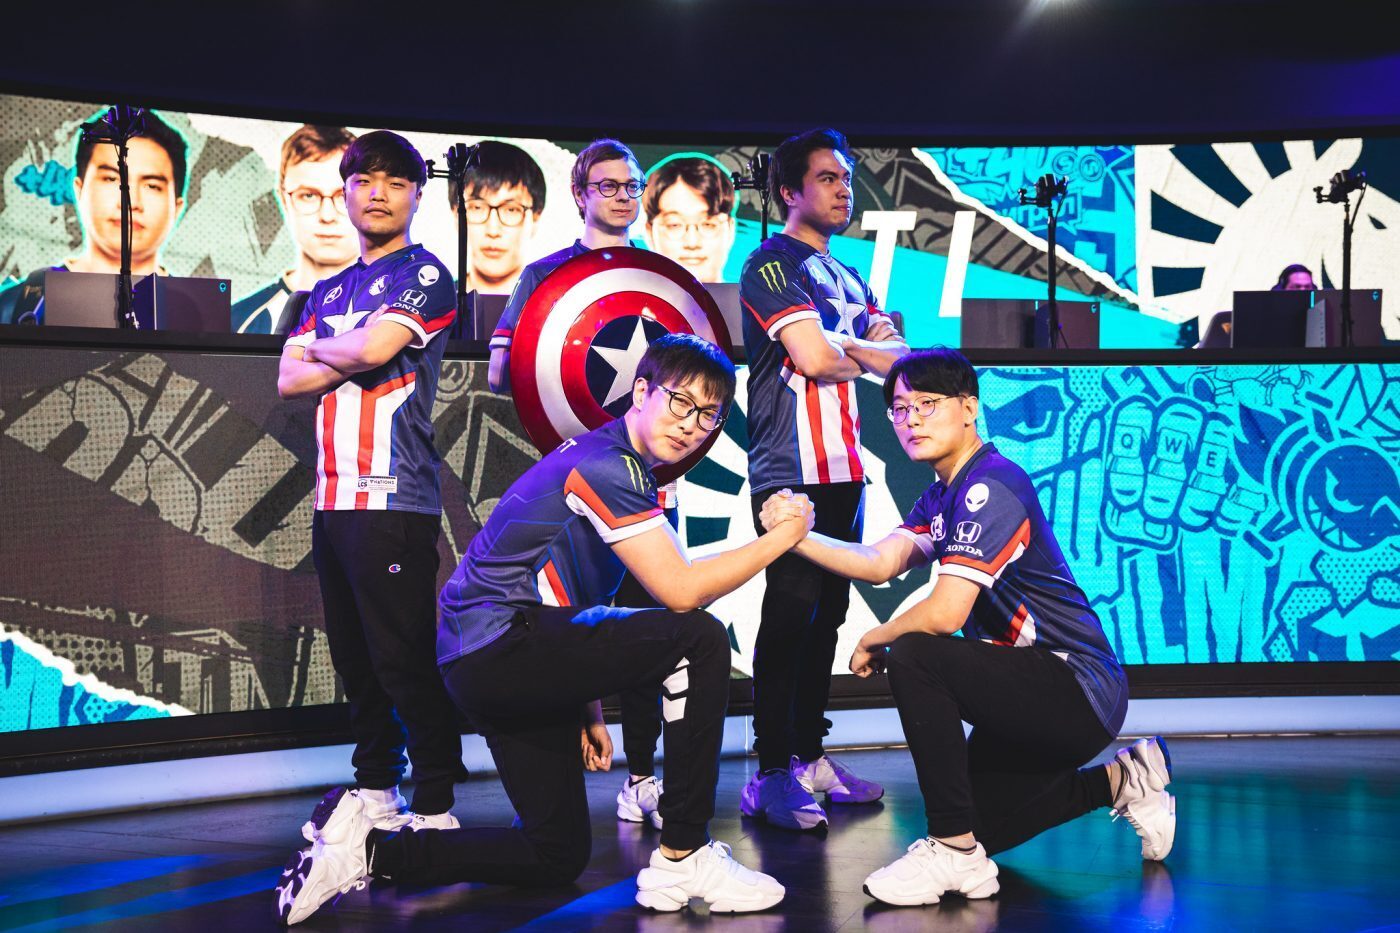 Team Liquid sit at the top of our power ranking for the LCS. The new jerseys may be appropriate. (Photo by Shannon Cottrell/Riot Games)